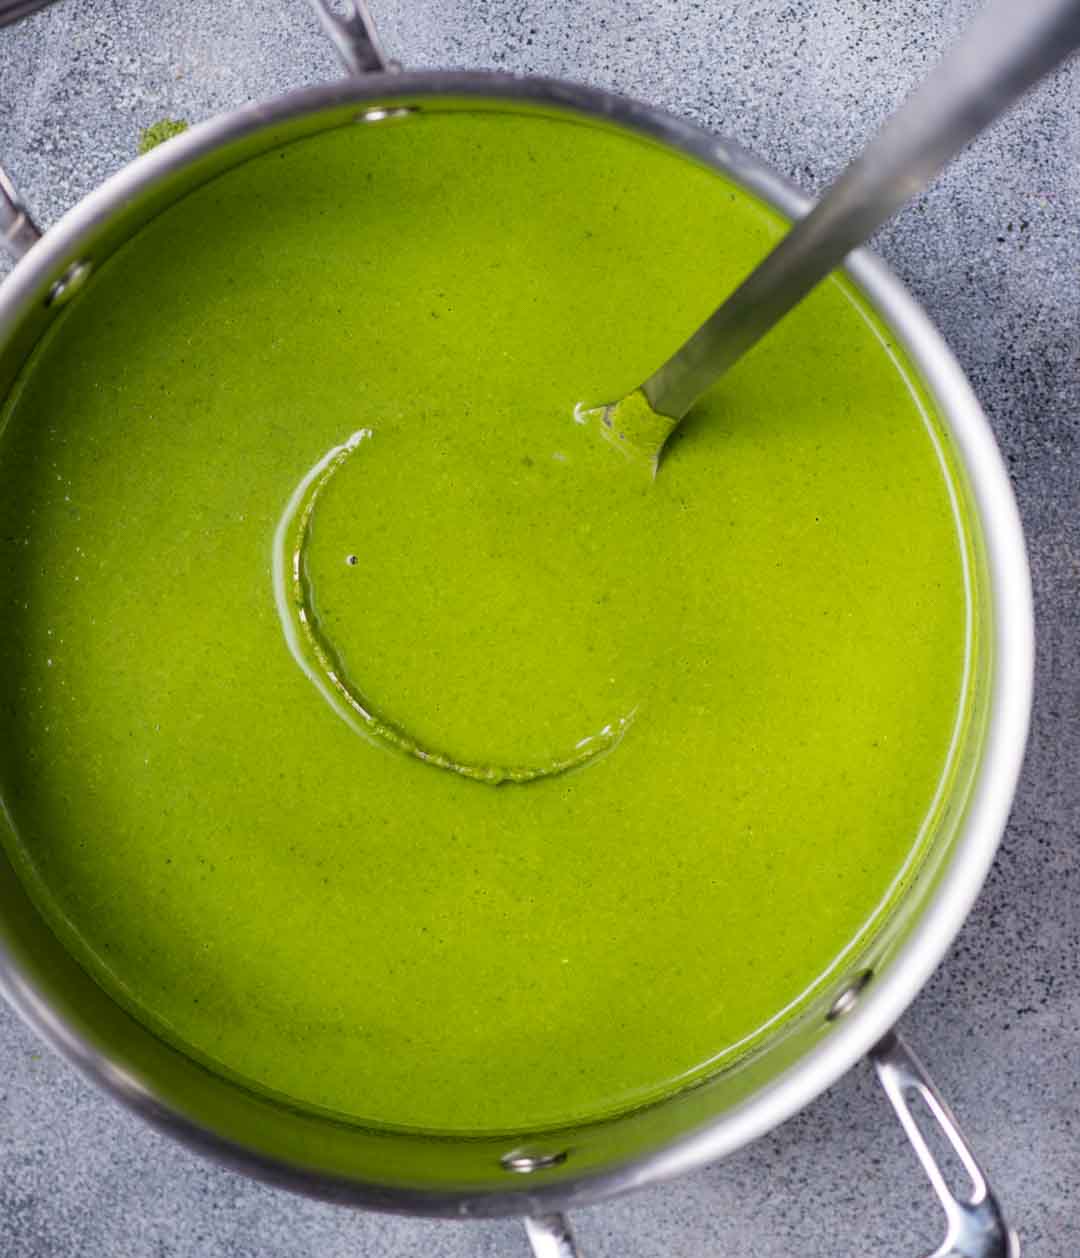 Luxuriously Creamy Spinach Soup is delicious and loaded with the goodness of spinach. There is only Spinach in here, thickened with cream cheese and it has a good dose of freshly cracked black pepper.